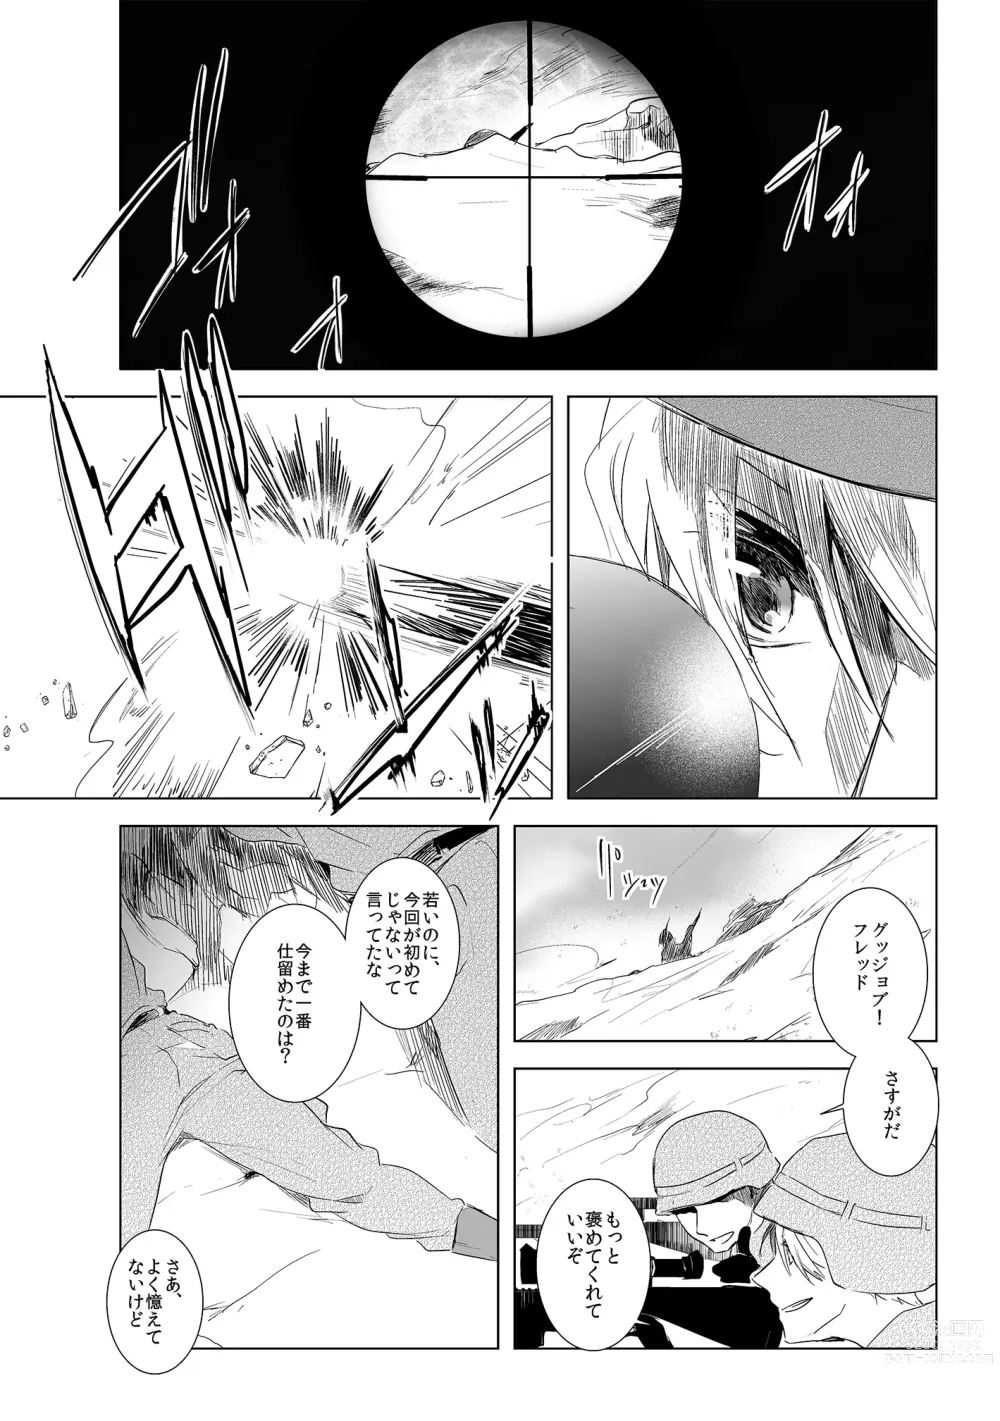 Page 2 of doujinshi Faint Promise